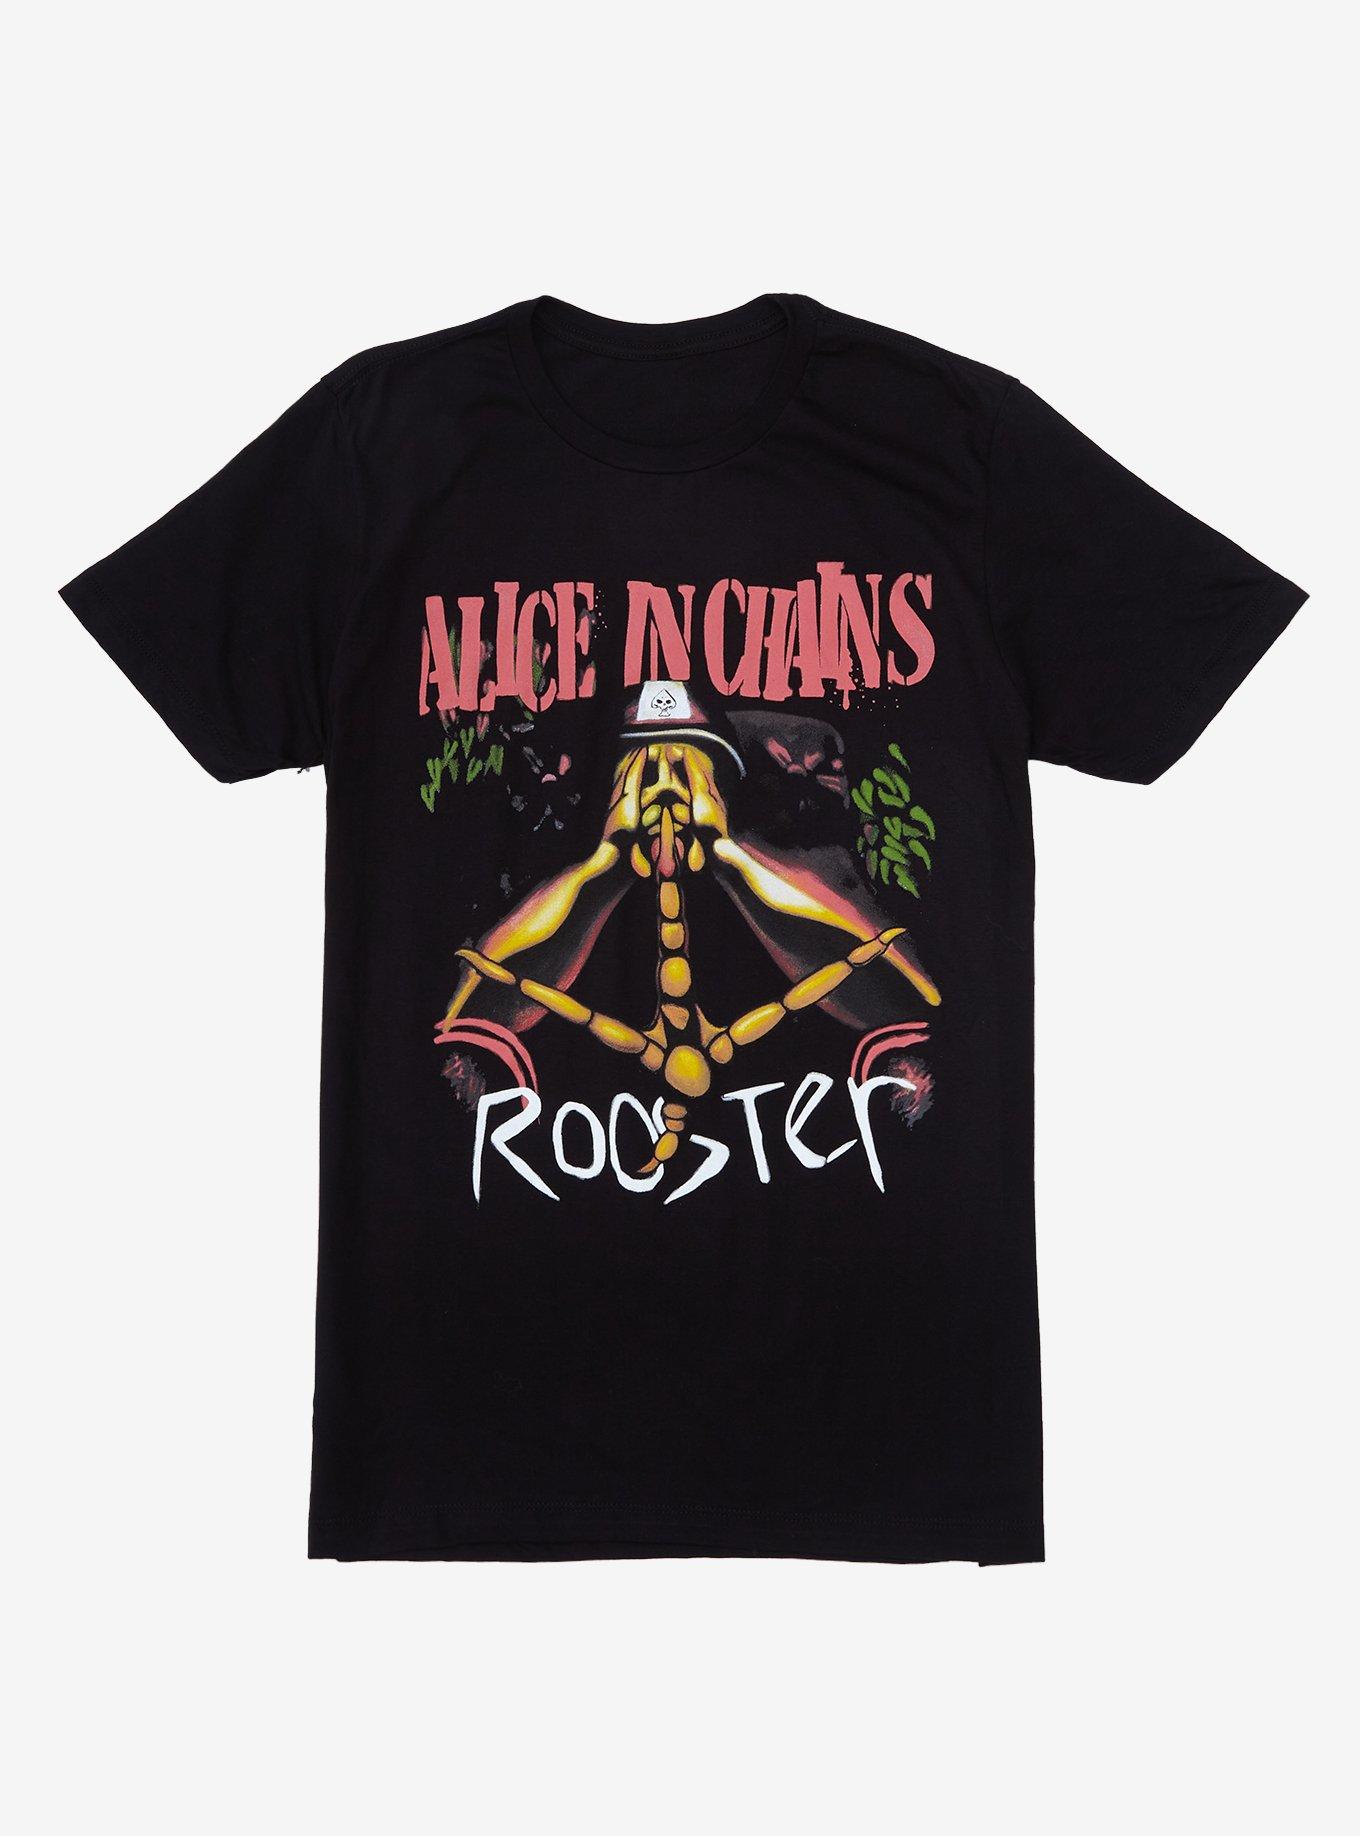 Alice In Chains Rooster 1993 T-Shirt